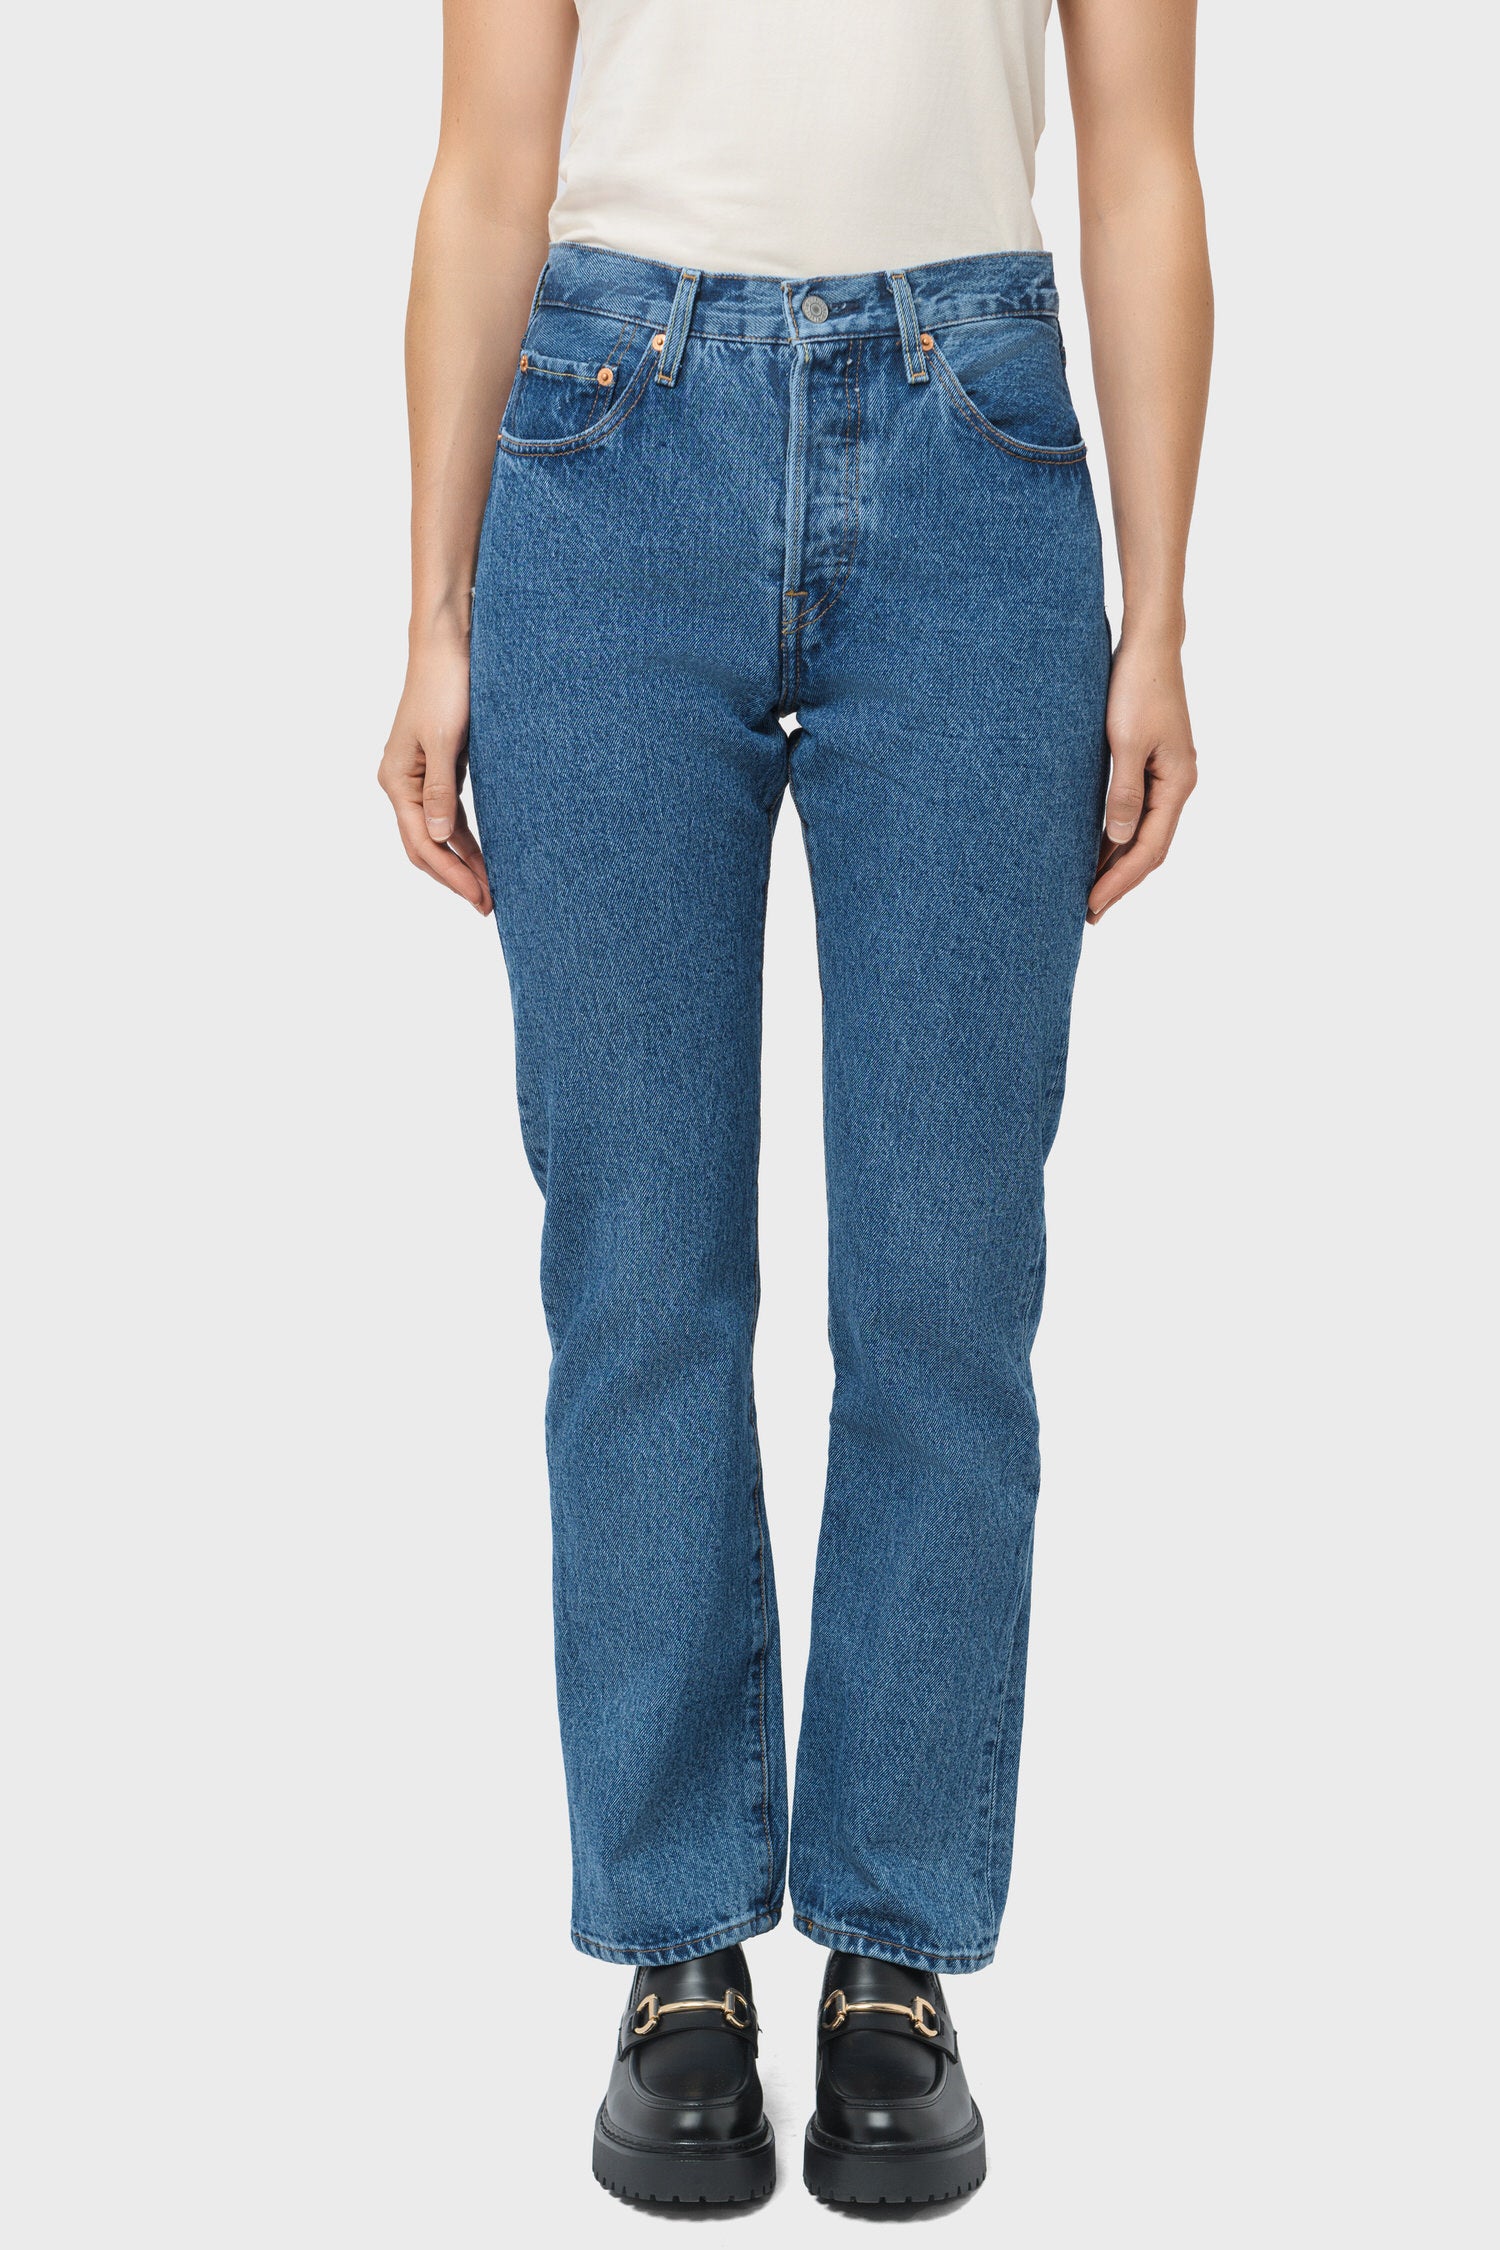 Women's Levi's 501 Jeans in Shout Out Stone